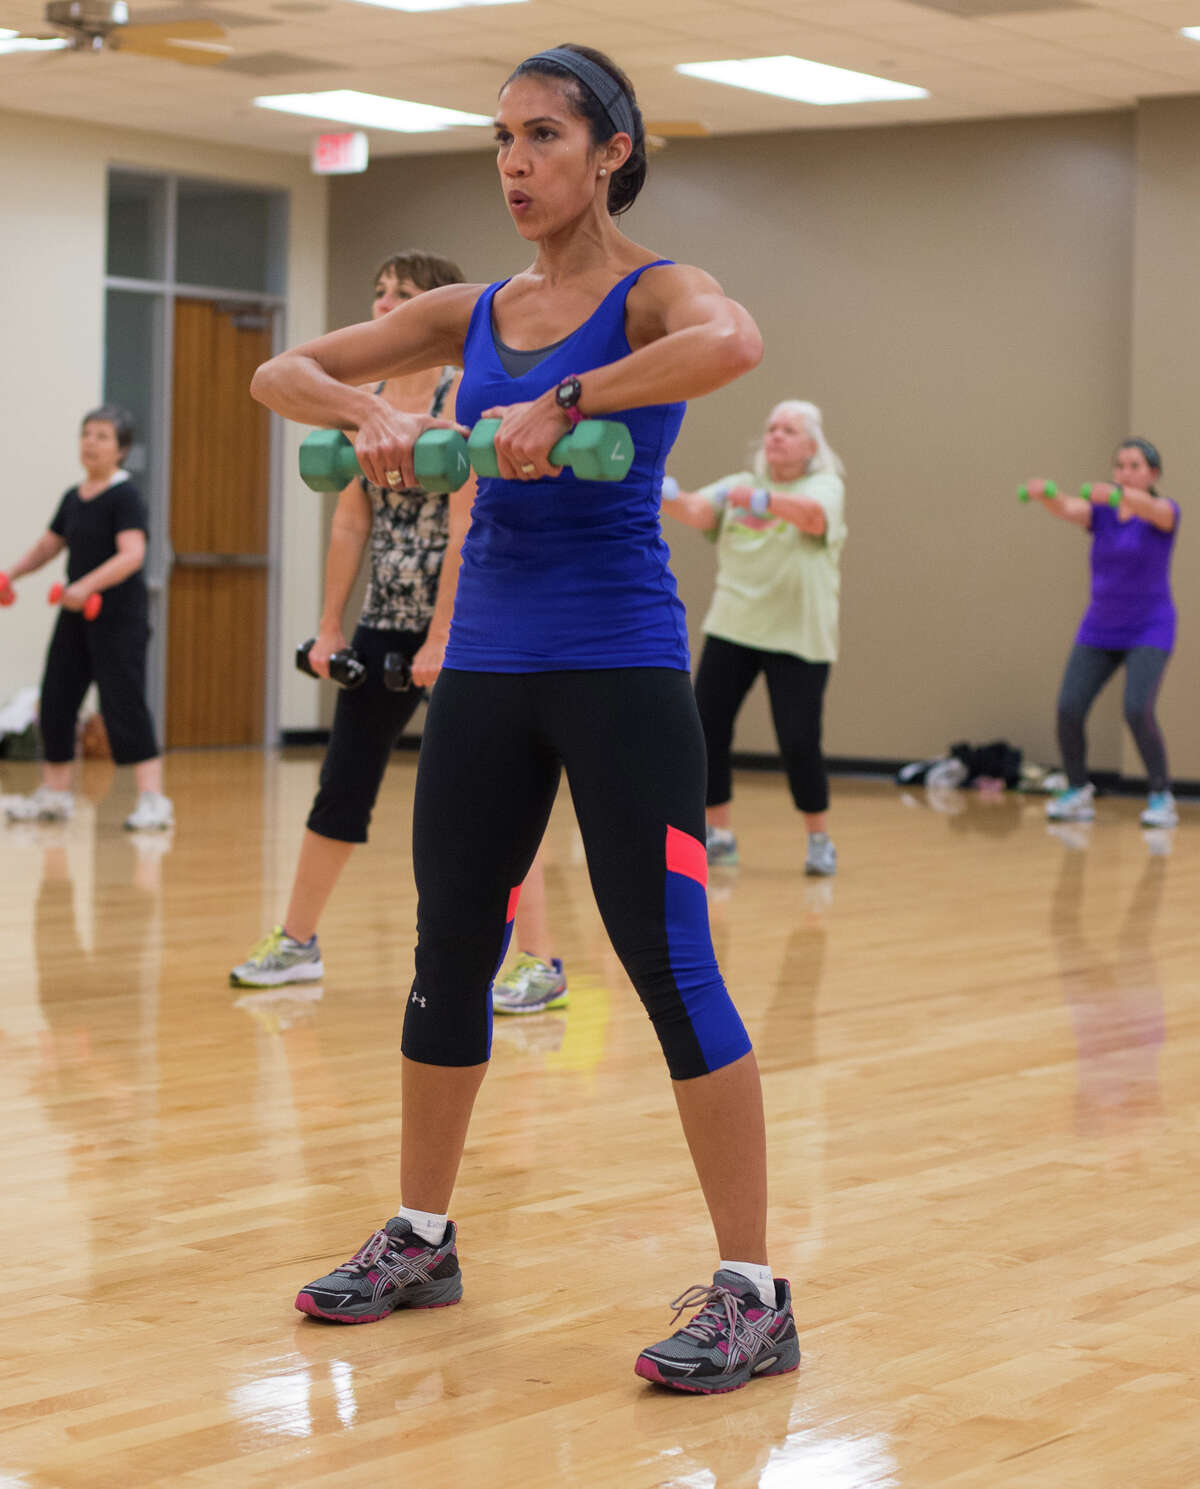 Rachel McNeill during her regular Jazzercise class at the West University Rec Center on Friday, November 14, 2014